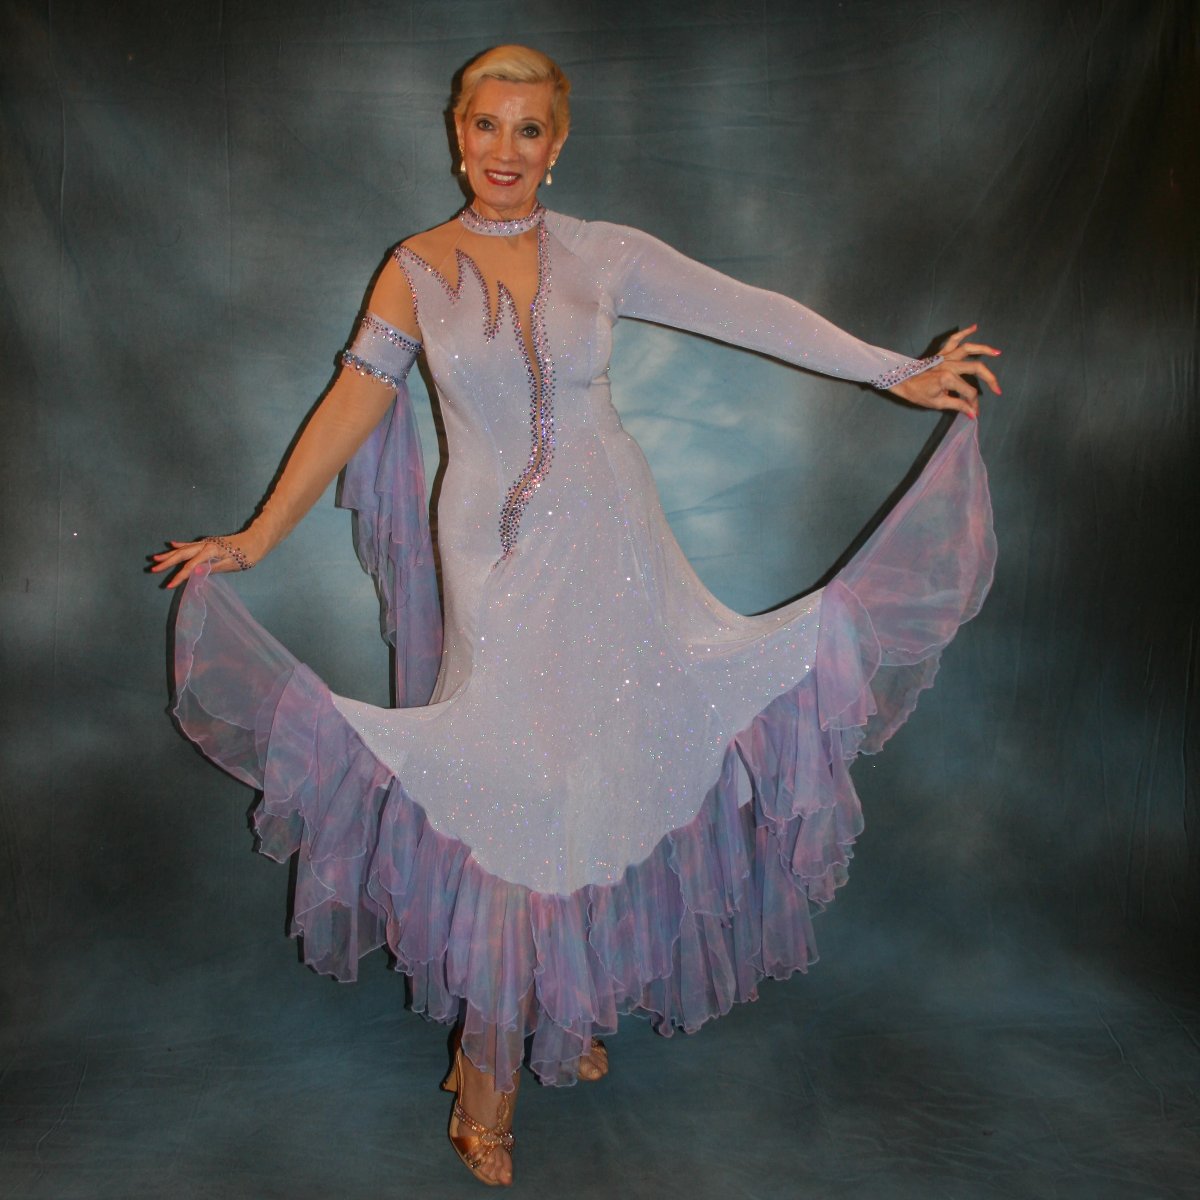 Crystal's Creations Blue ballroom dress created in periwinkle blue luxurious glitter slinky on nude illusion base with tricot chiffon flounces in shades of perwinkle & soft pink